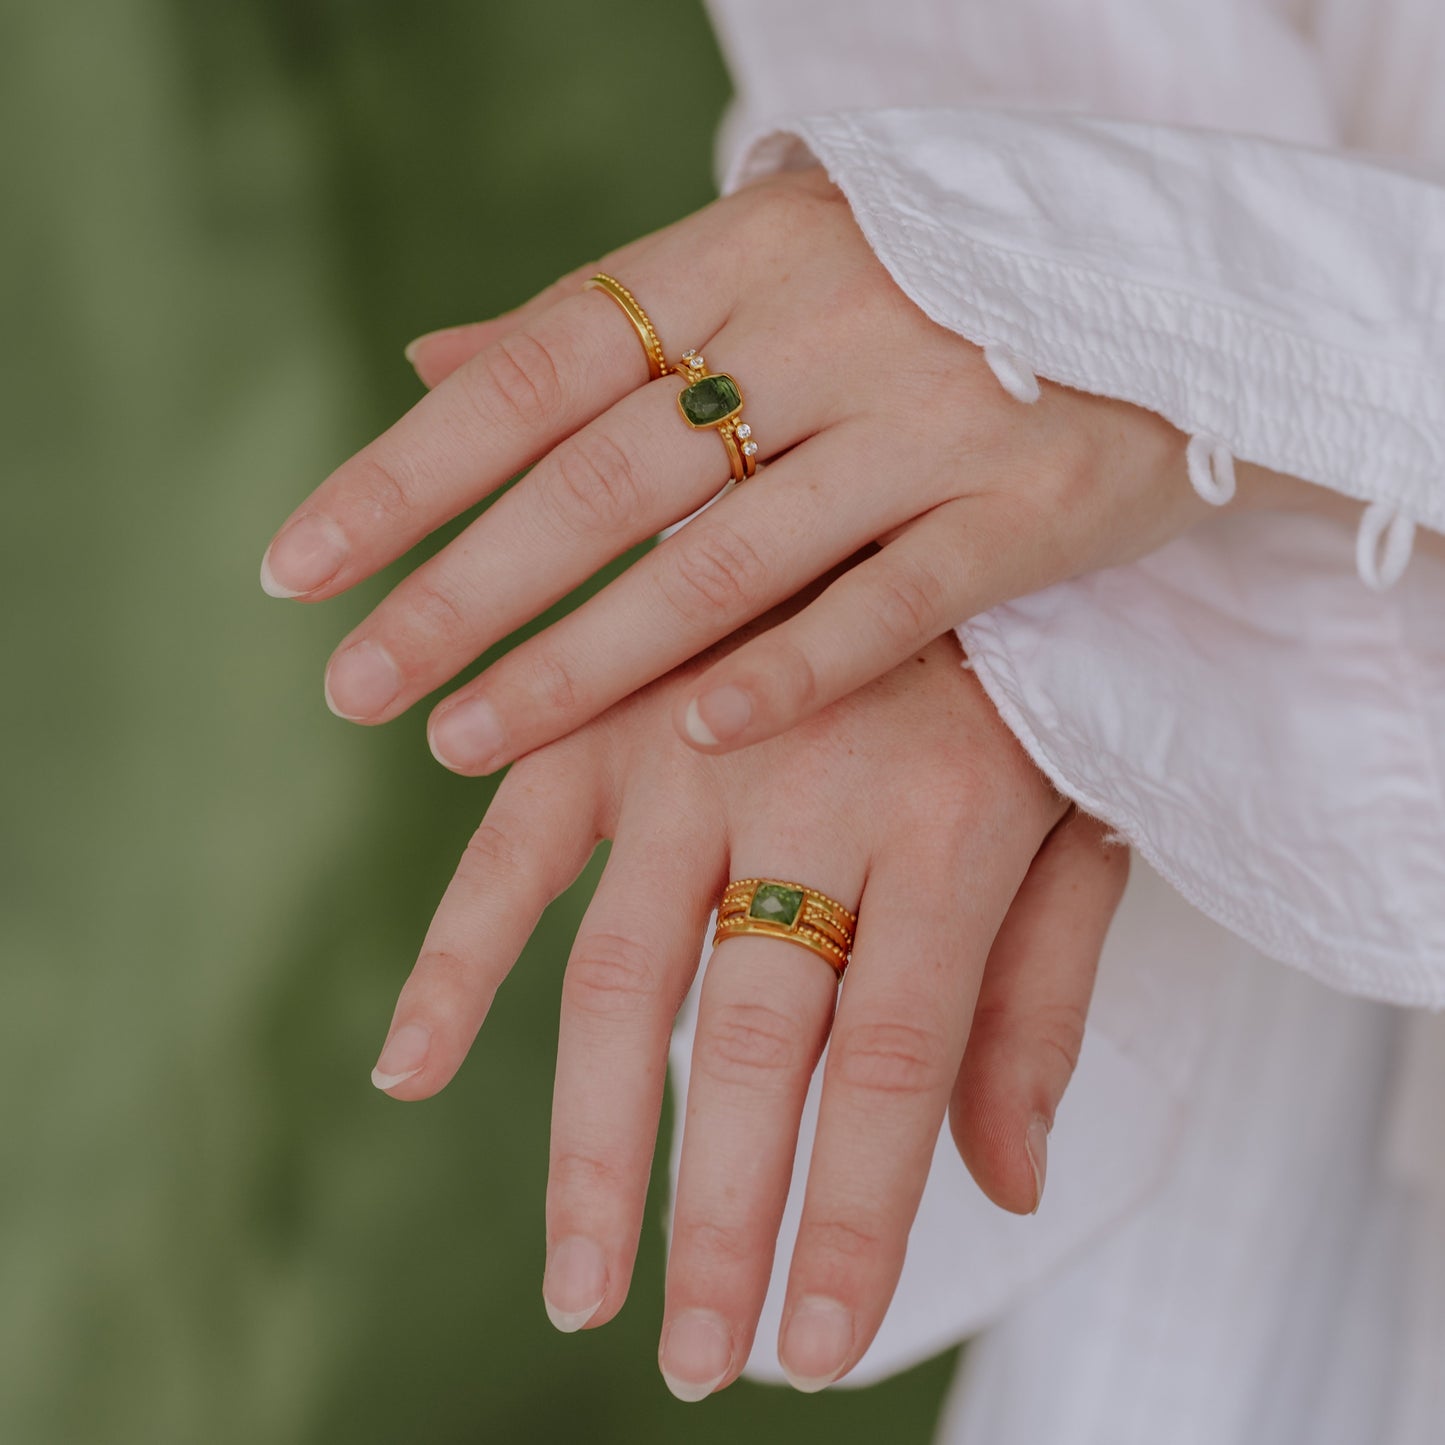 A stunning display of handcrafted gold rings, expertly detailed with granulation, and centred around natural green tourmaline gemstones.